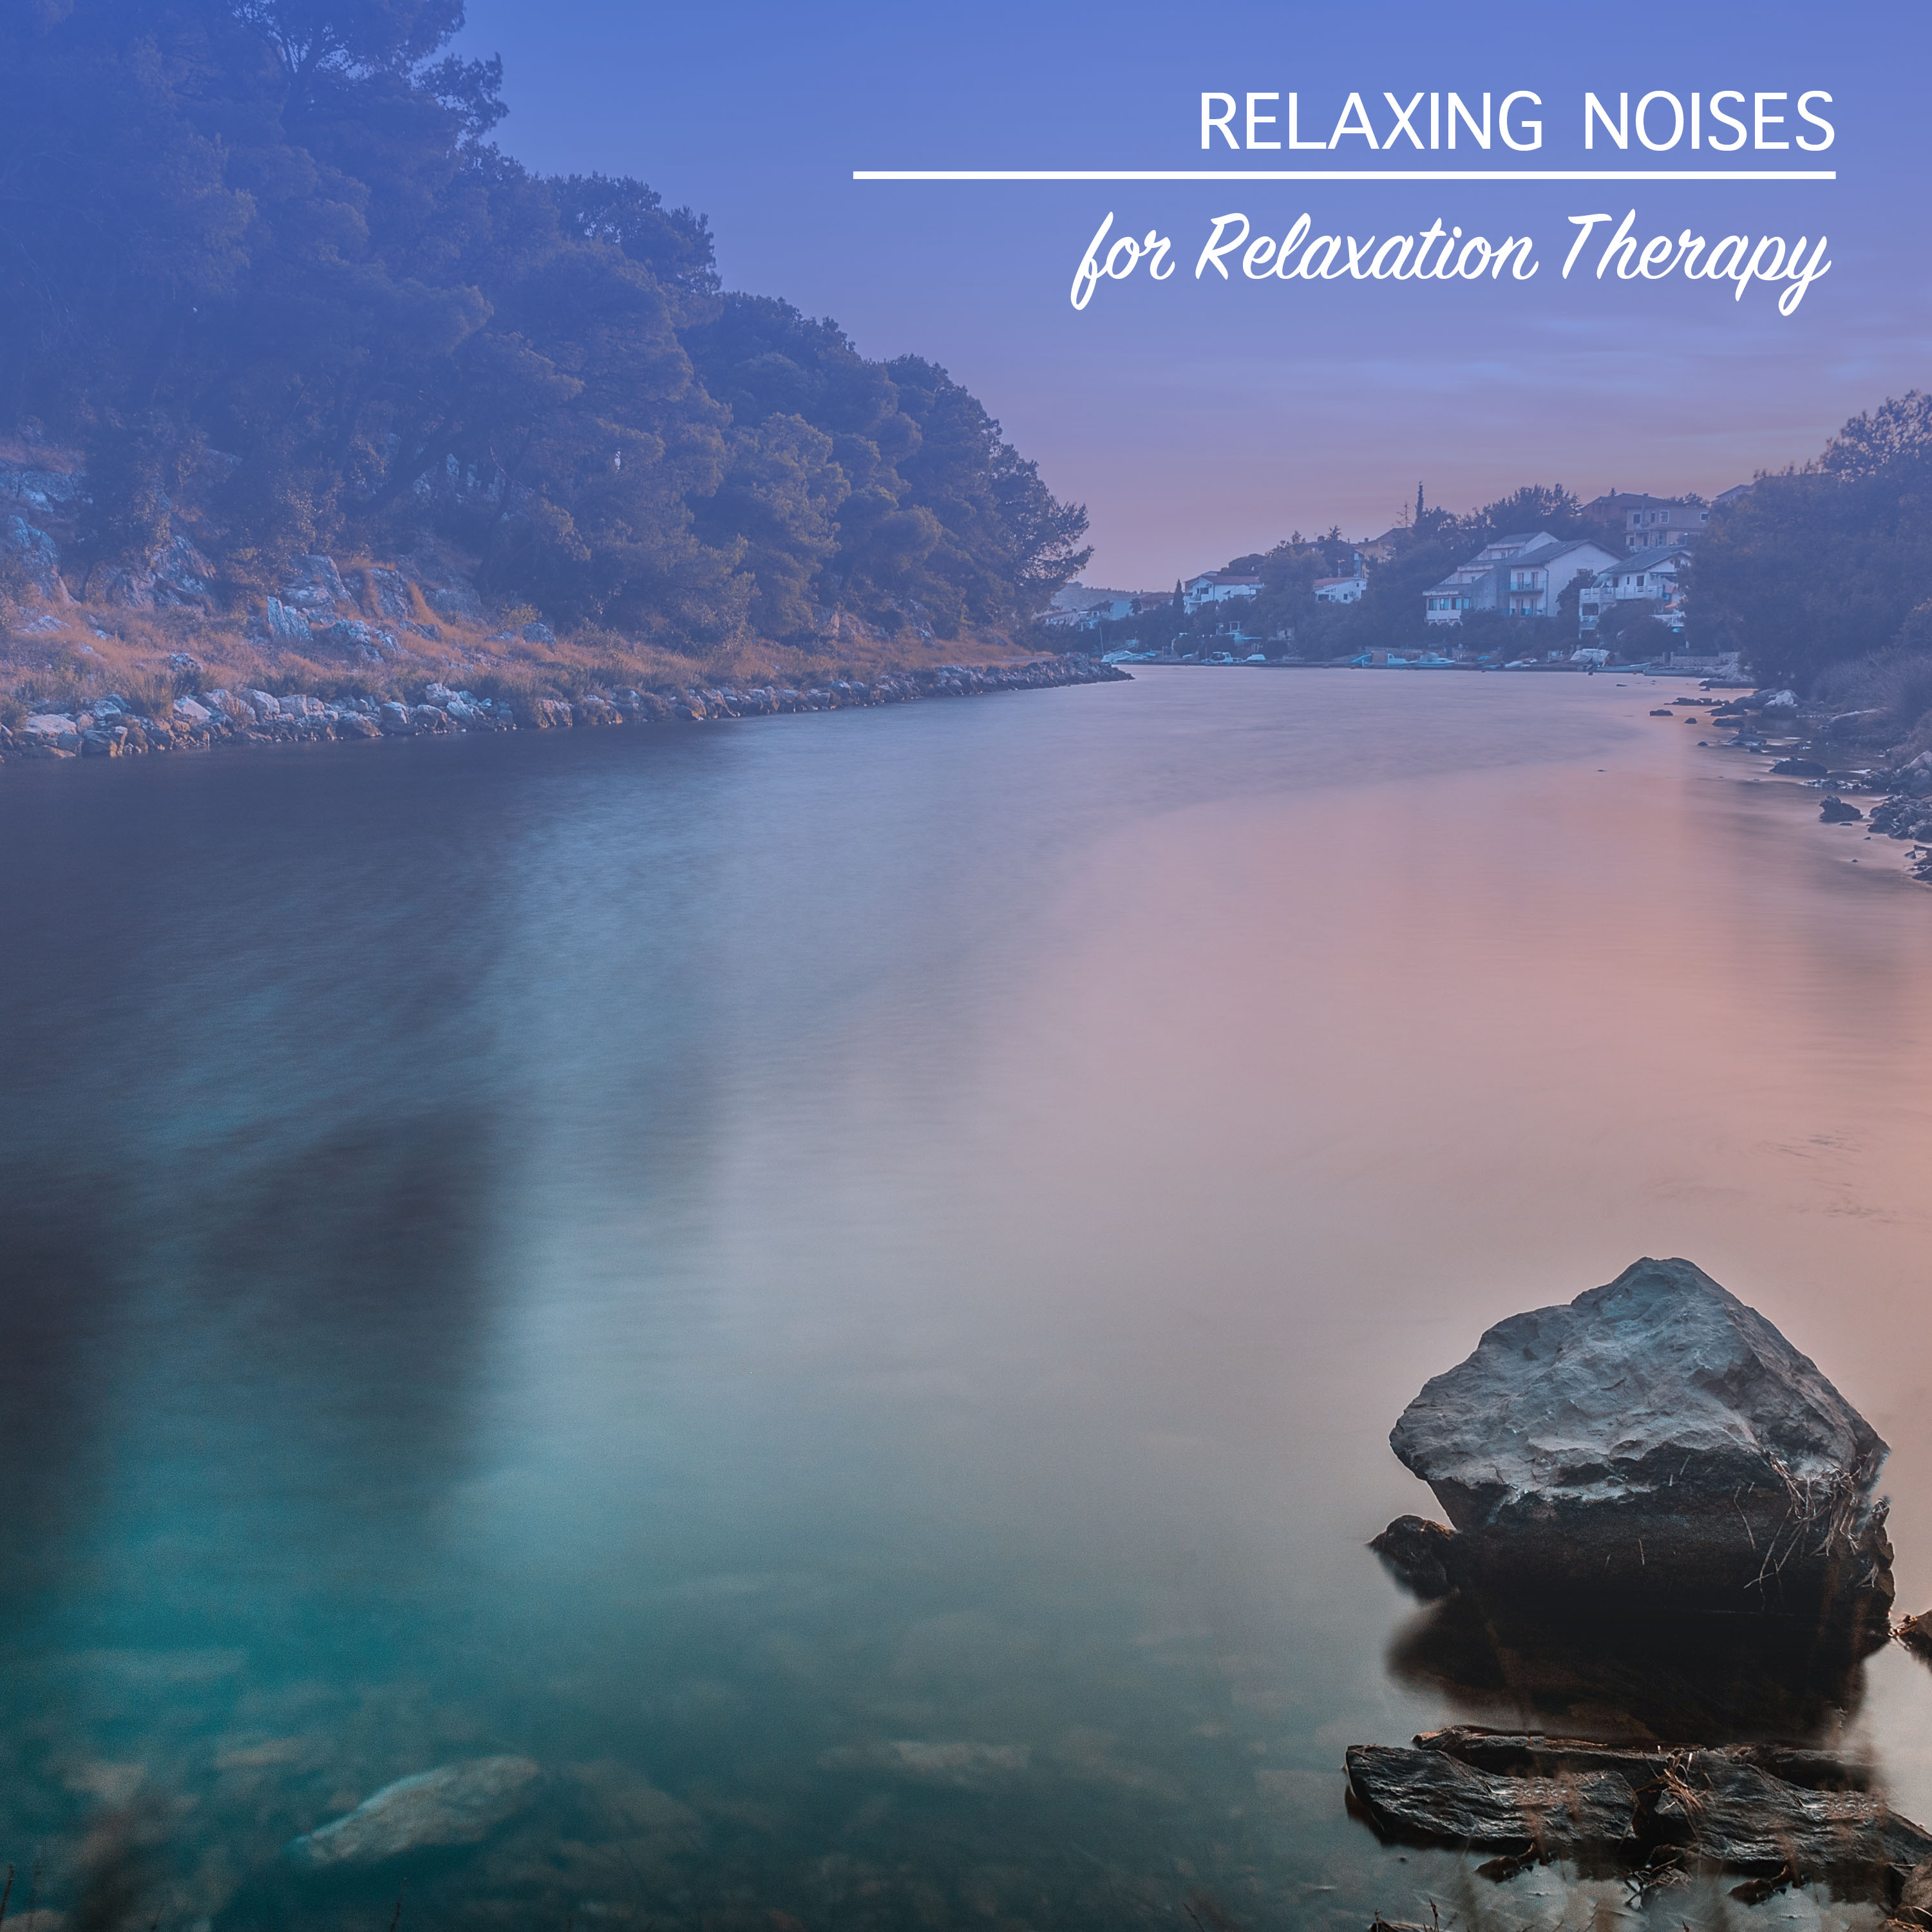 10 Relaxing Noises for Relaxation Therapy